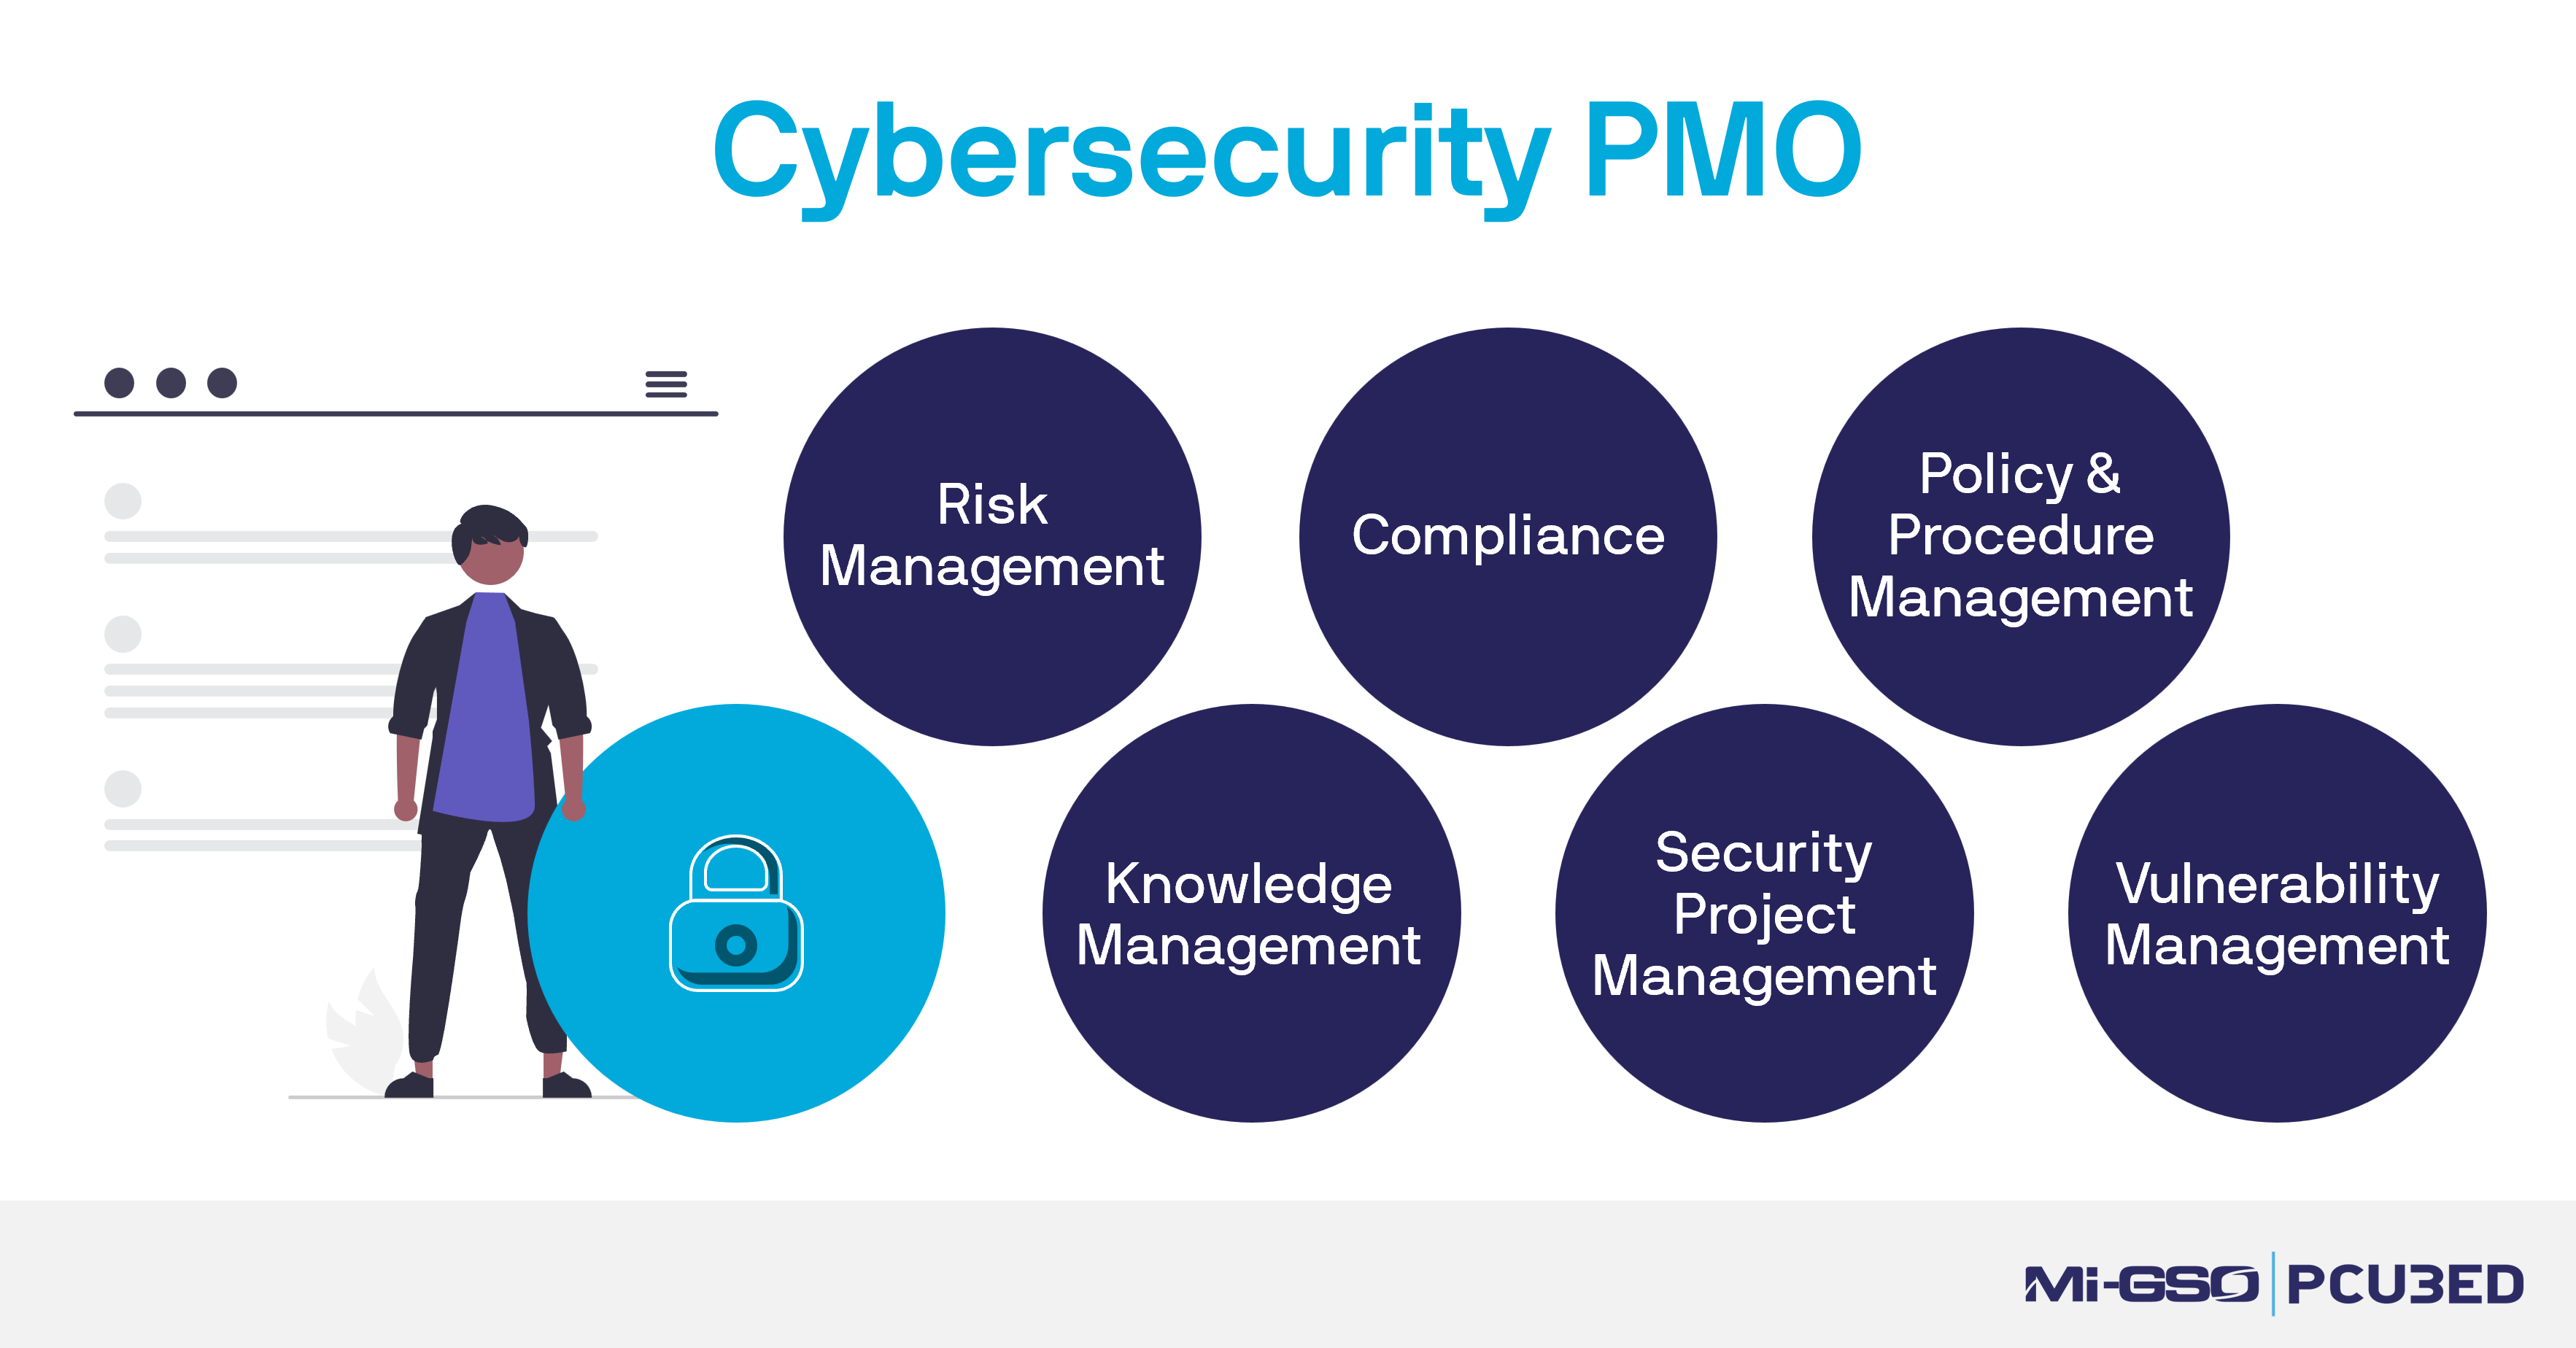 6 Elements of a Cybersecurity PMO